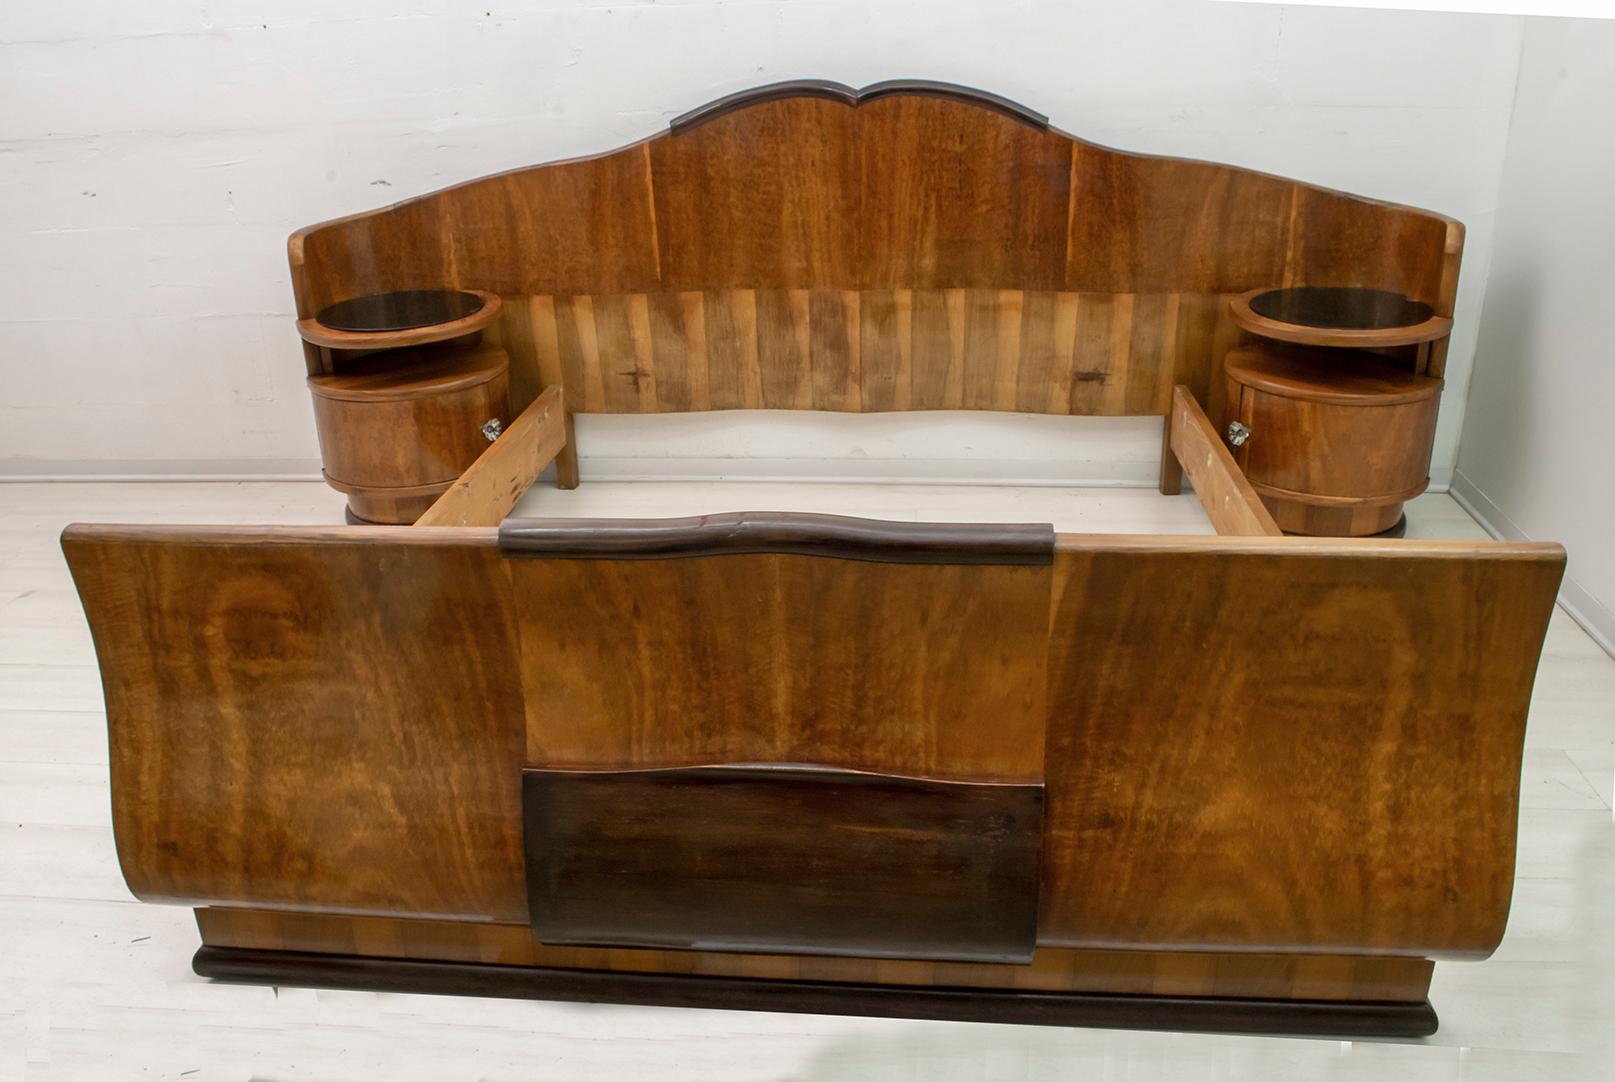 Particular double bed in Walnut wood from the Art Deco period. The headboard is a unique piece with rounded shapes that embraces the two bedside tables.

Mattress dimensions

Height 30 cm
Width 160 cm
Depth 190 cm

The Art Deco movement,